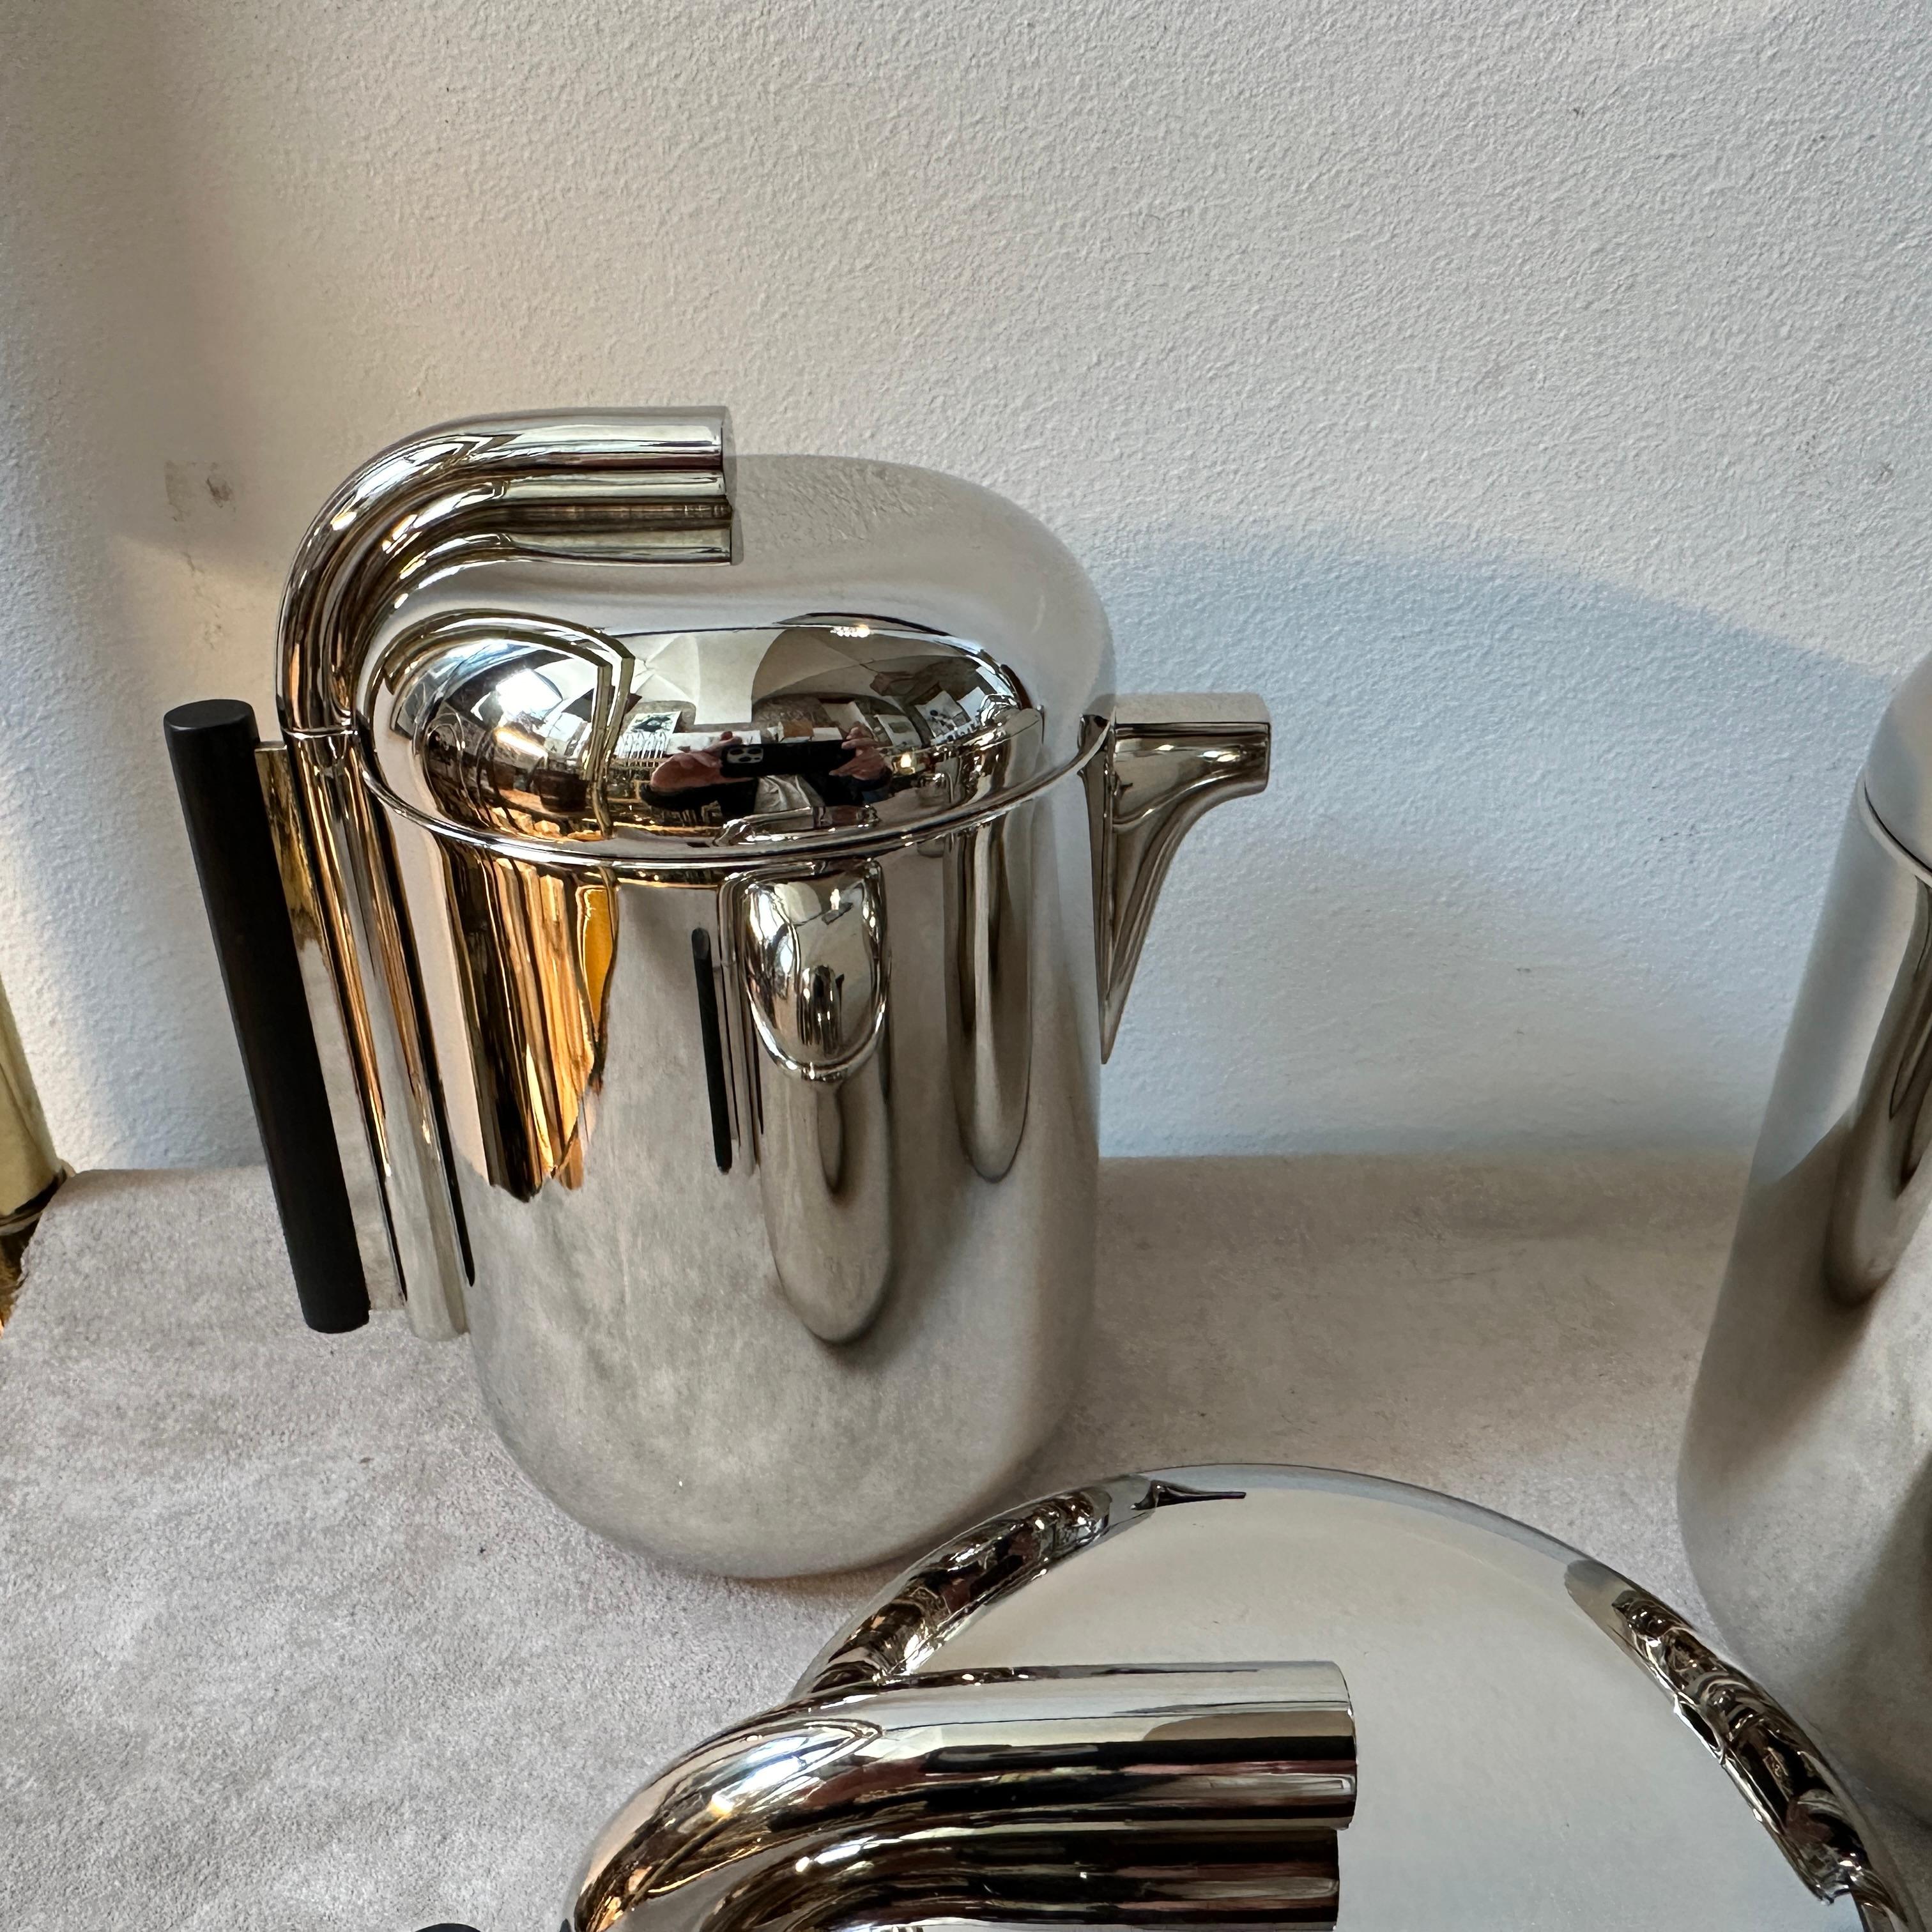 1960s Silver Plated Tea and Coffee Set Designed by G. Coarezza for Mam Milano For Sale 11